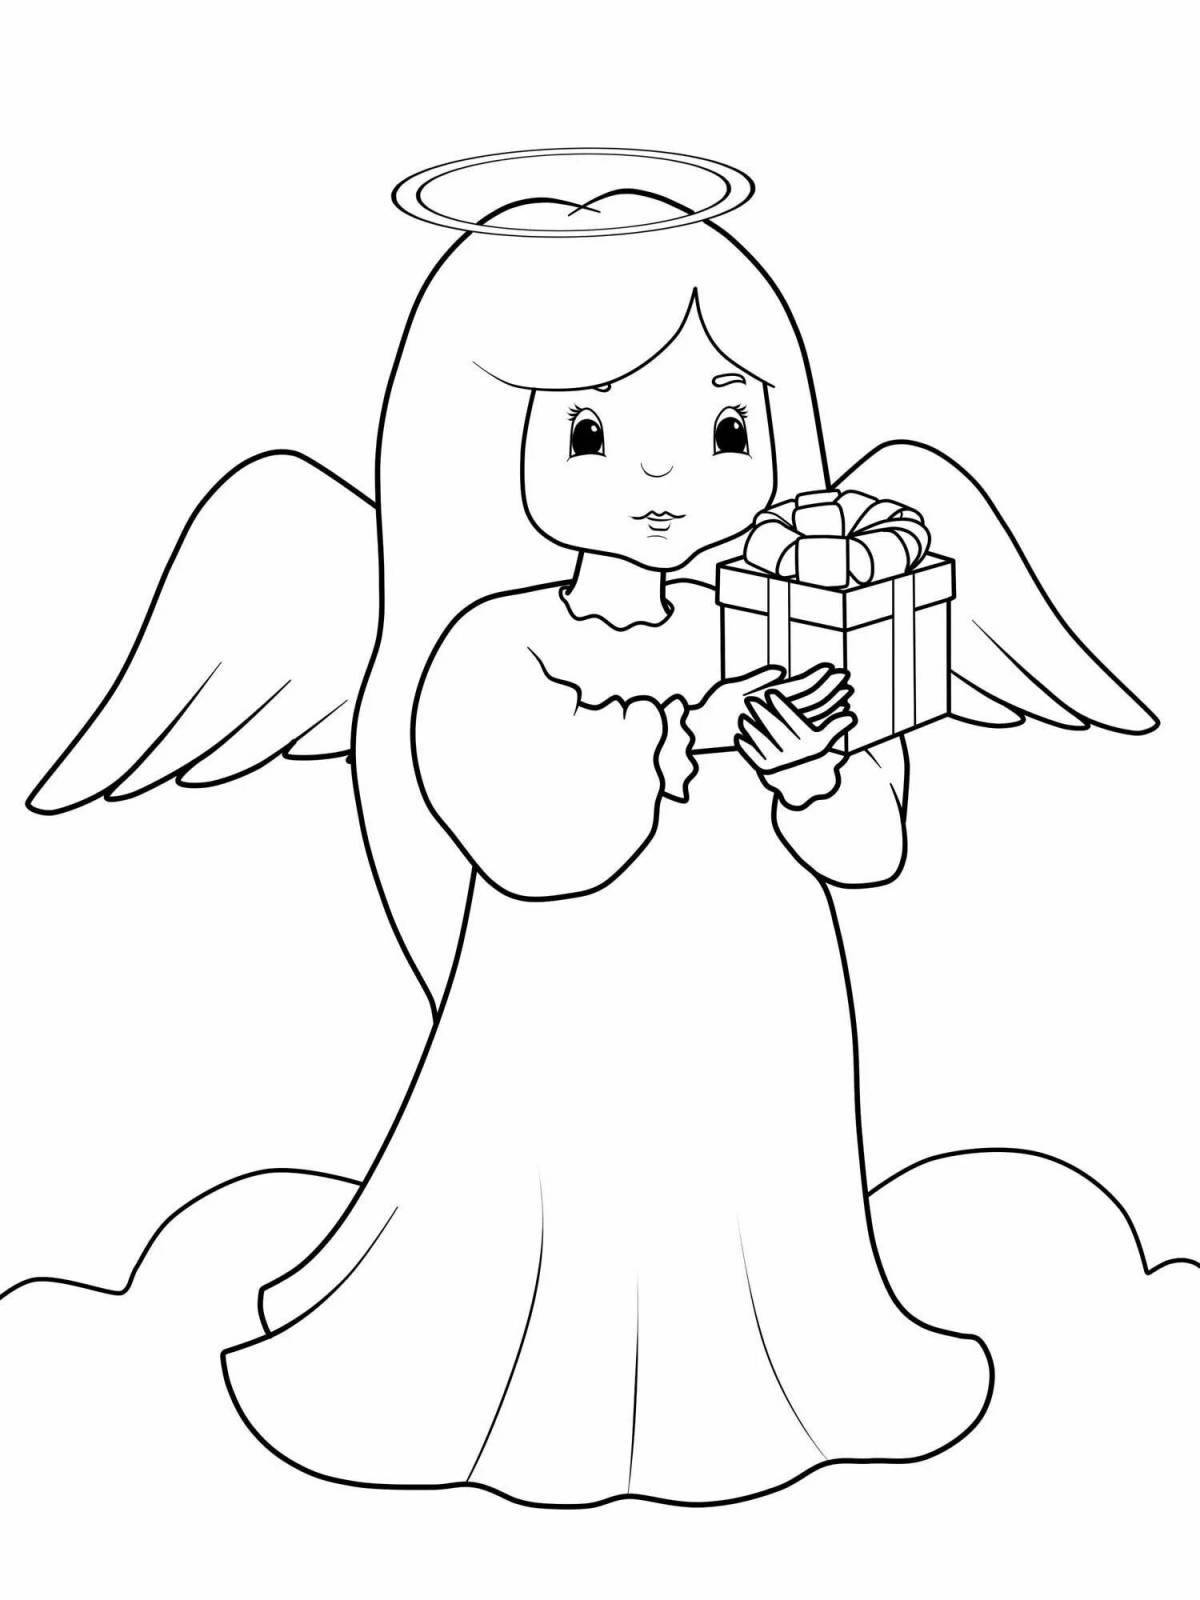 Christmas angel coloring pages for kids